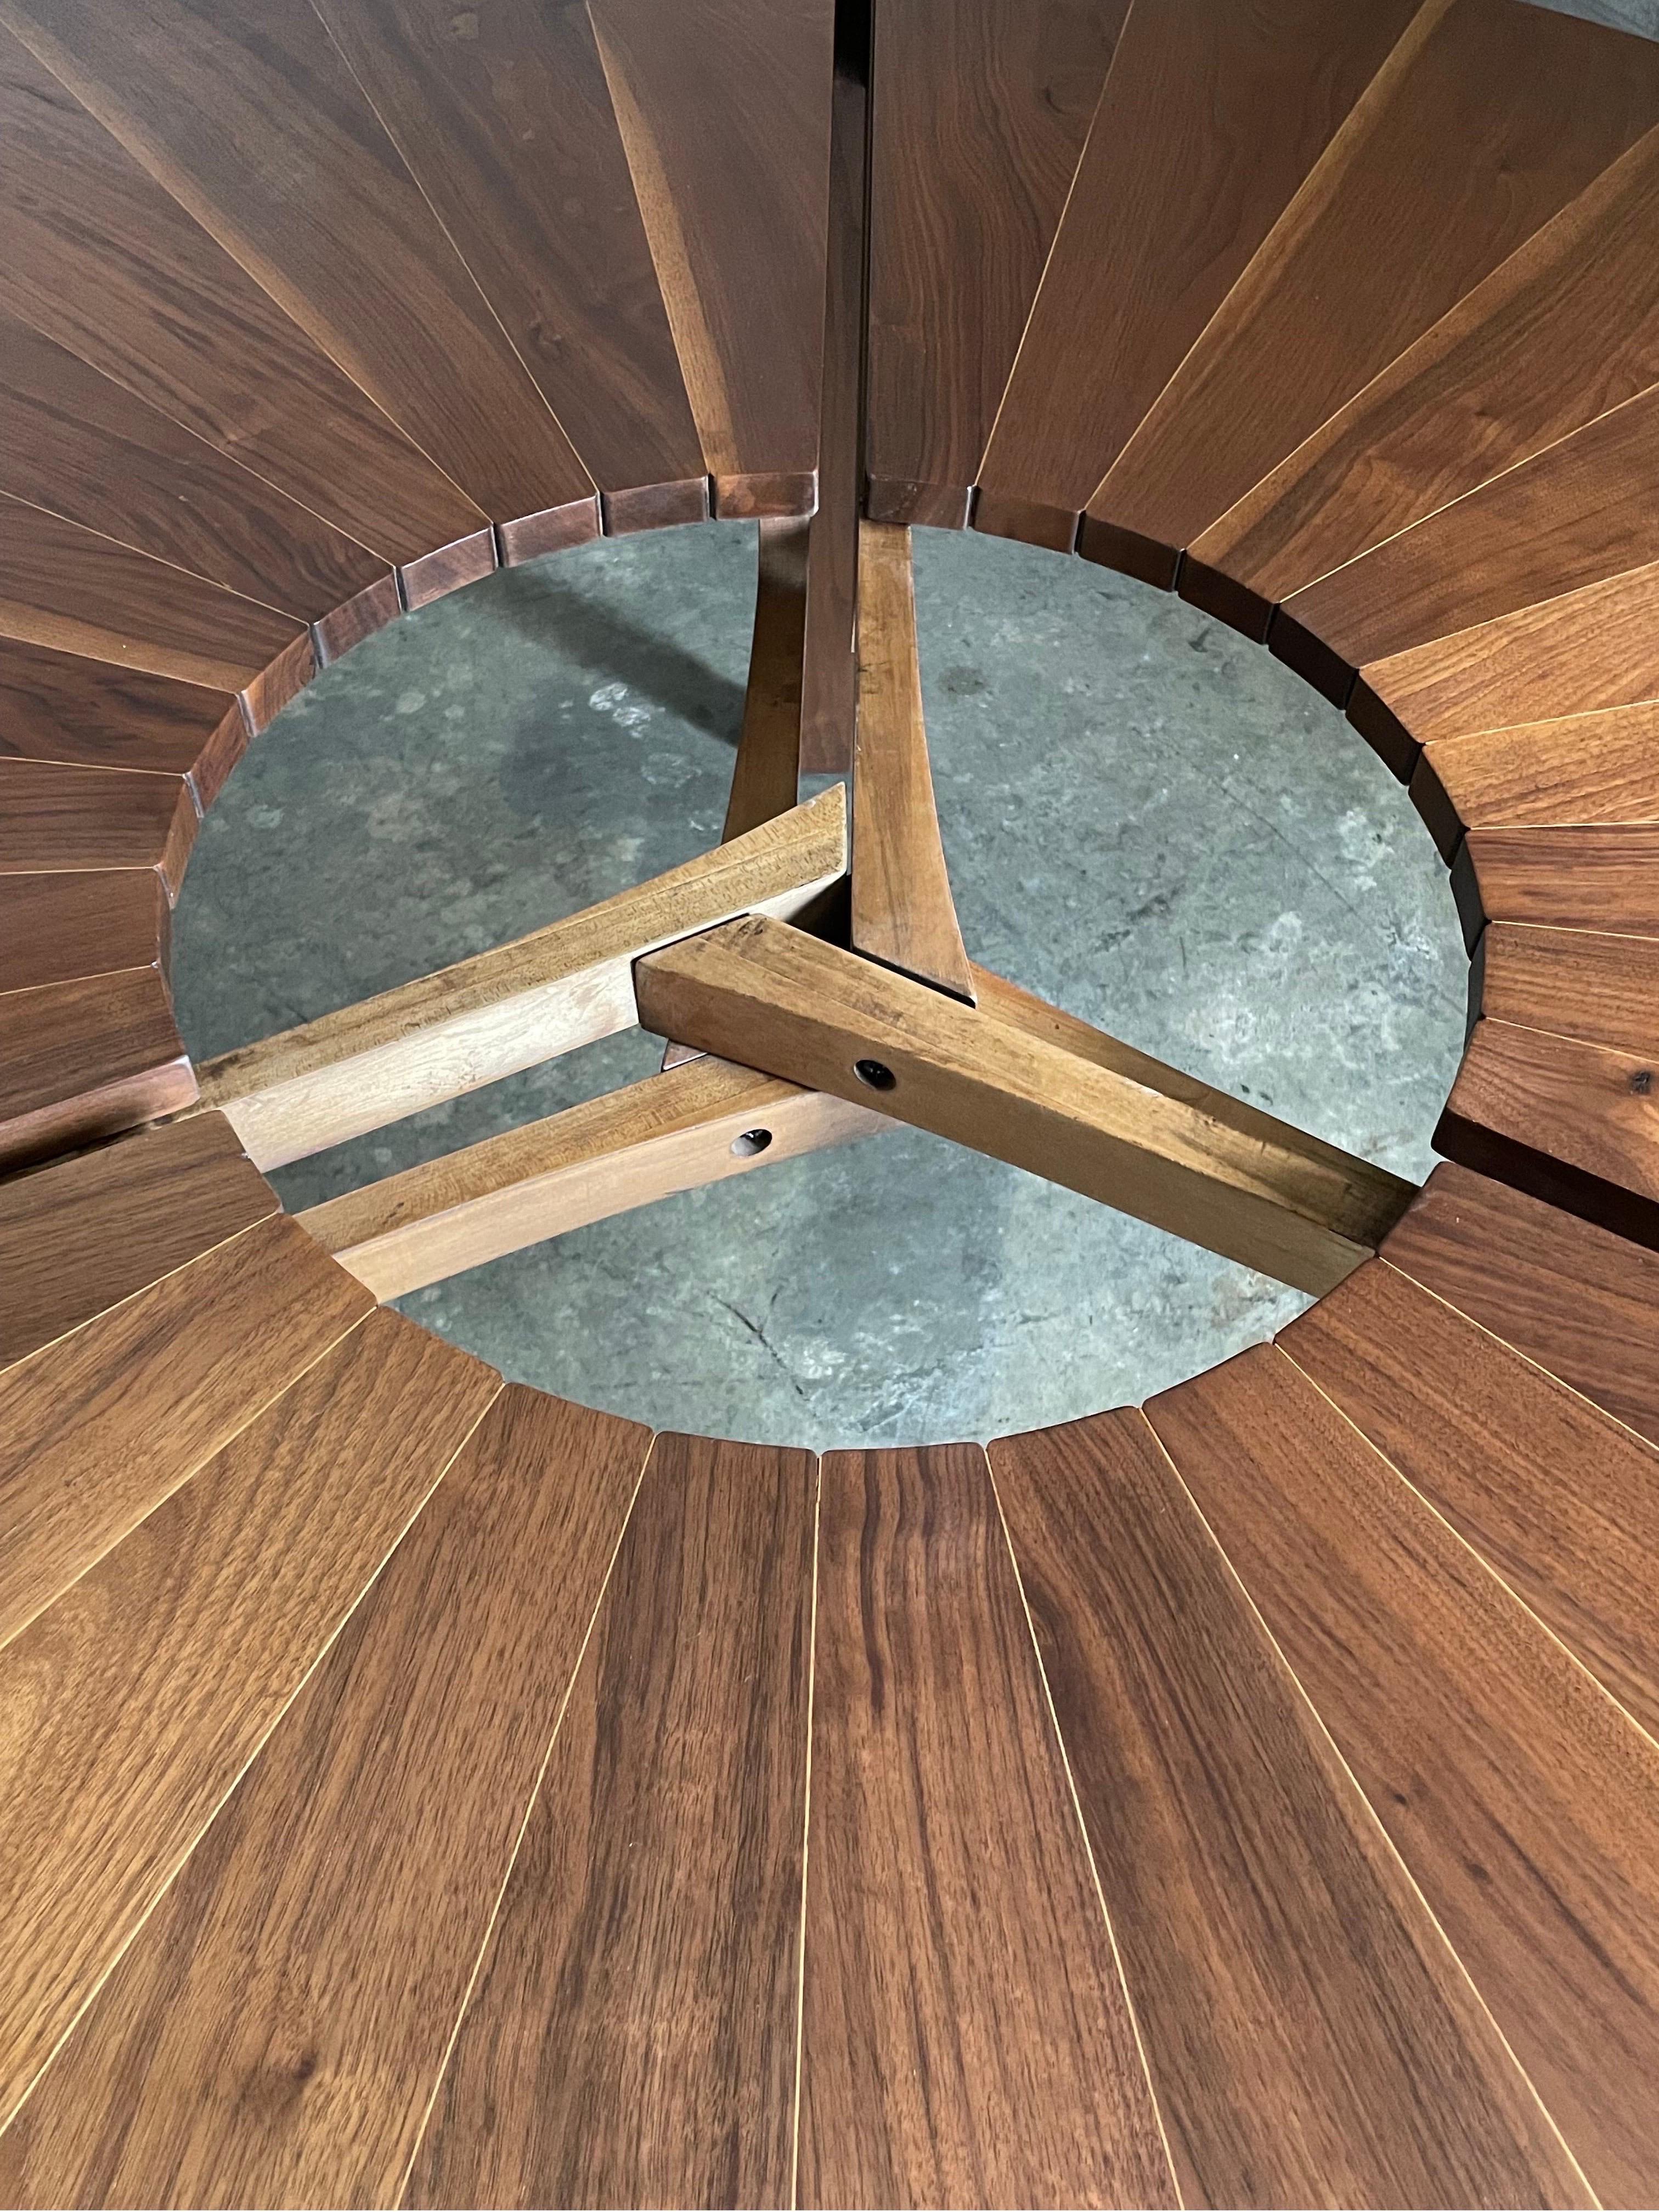 Studiocraft Round Petal Dining Table in Walnut and Maple, Charles Faucher 1975 7